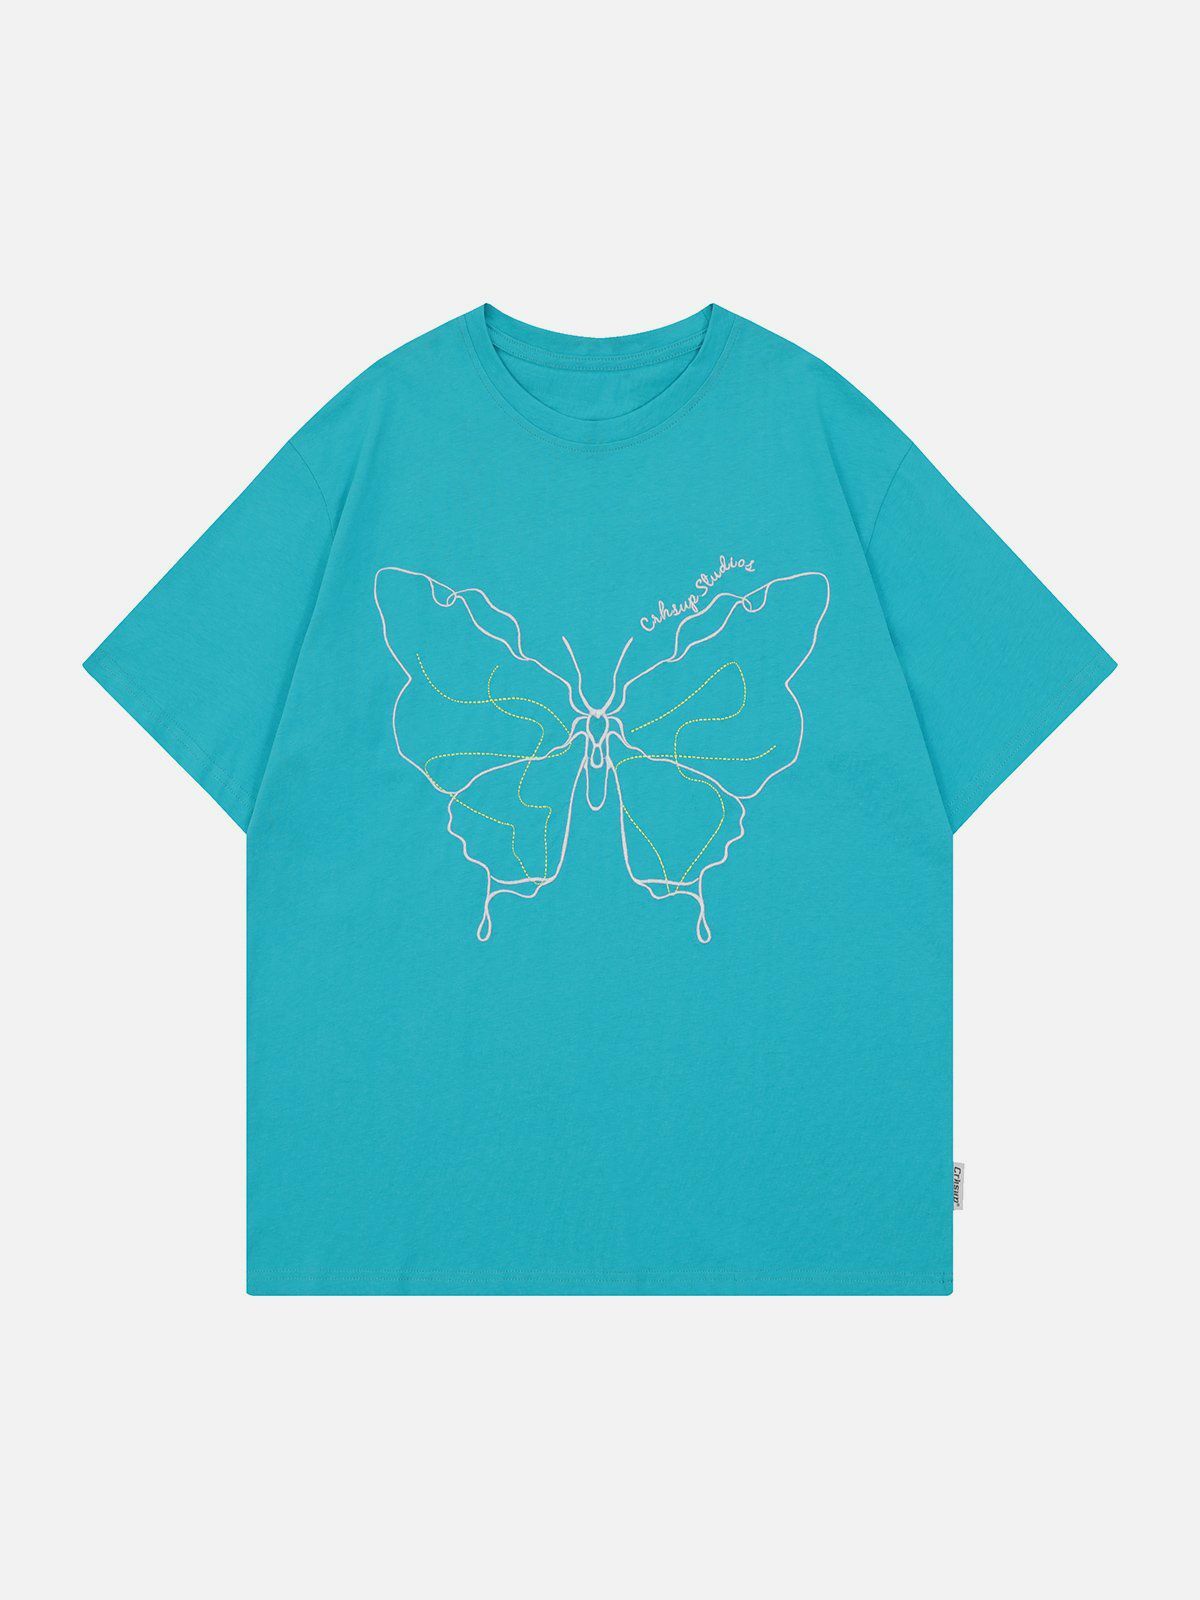 embroidered butterfly tee edgy retro streetwear shirt 2244